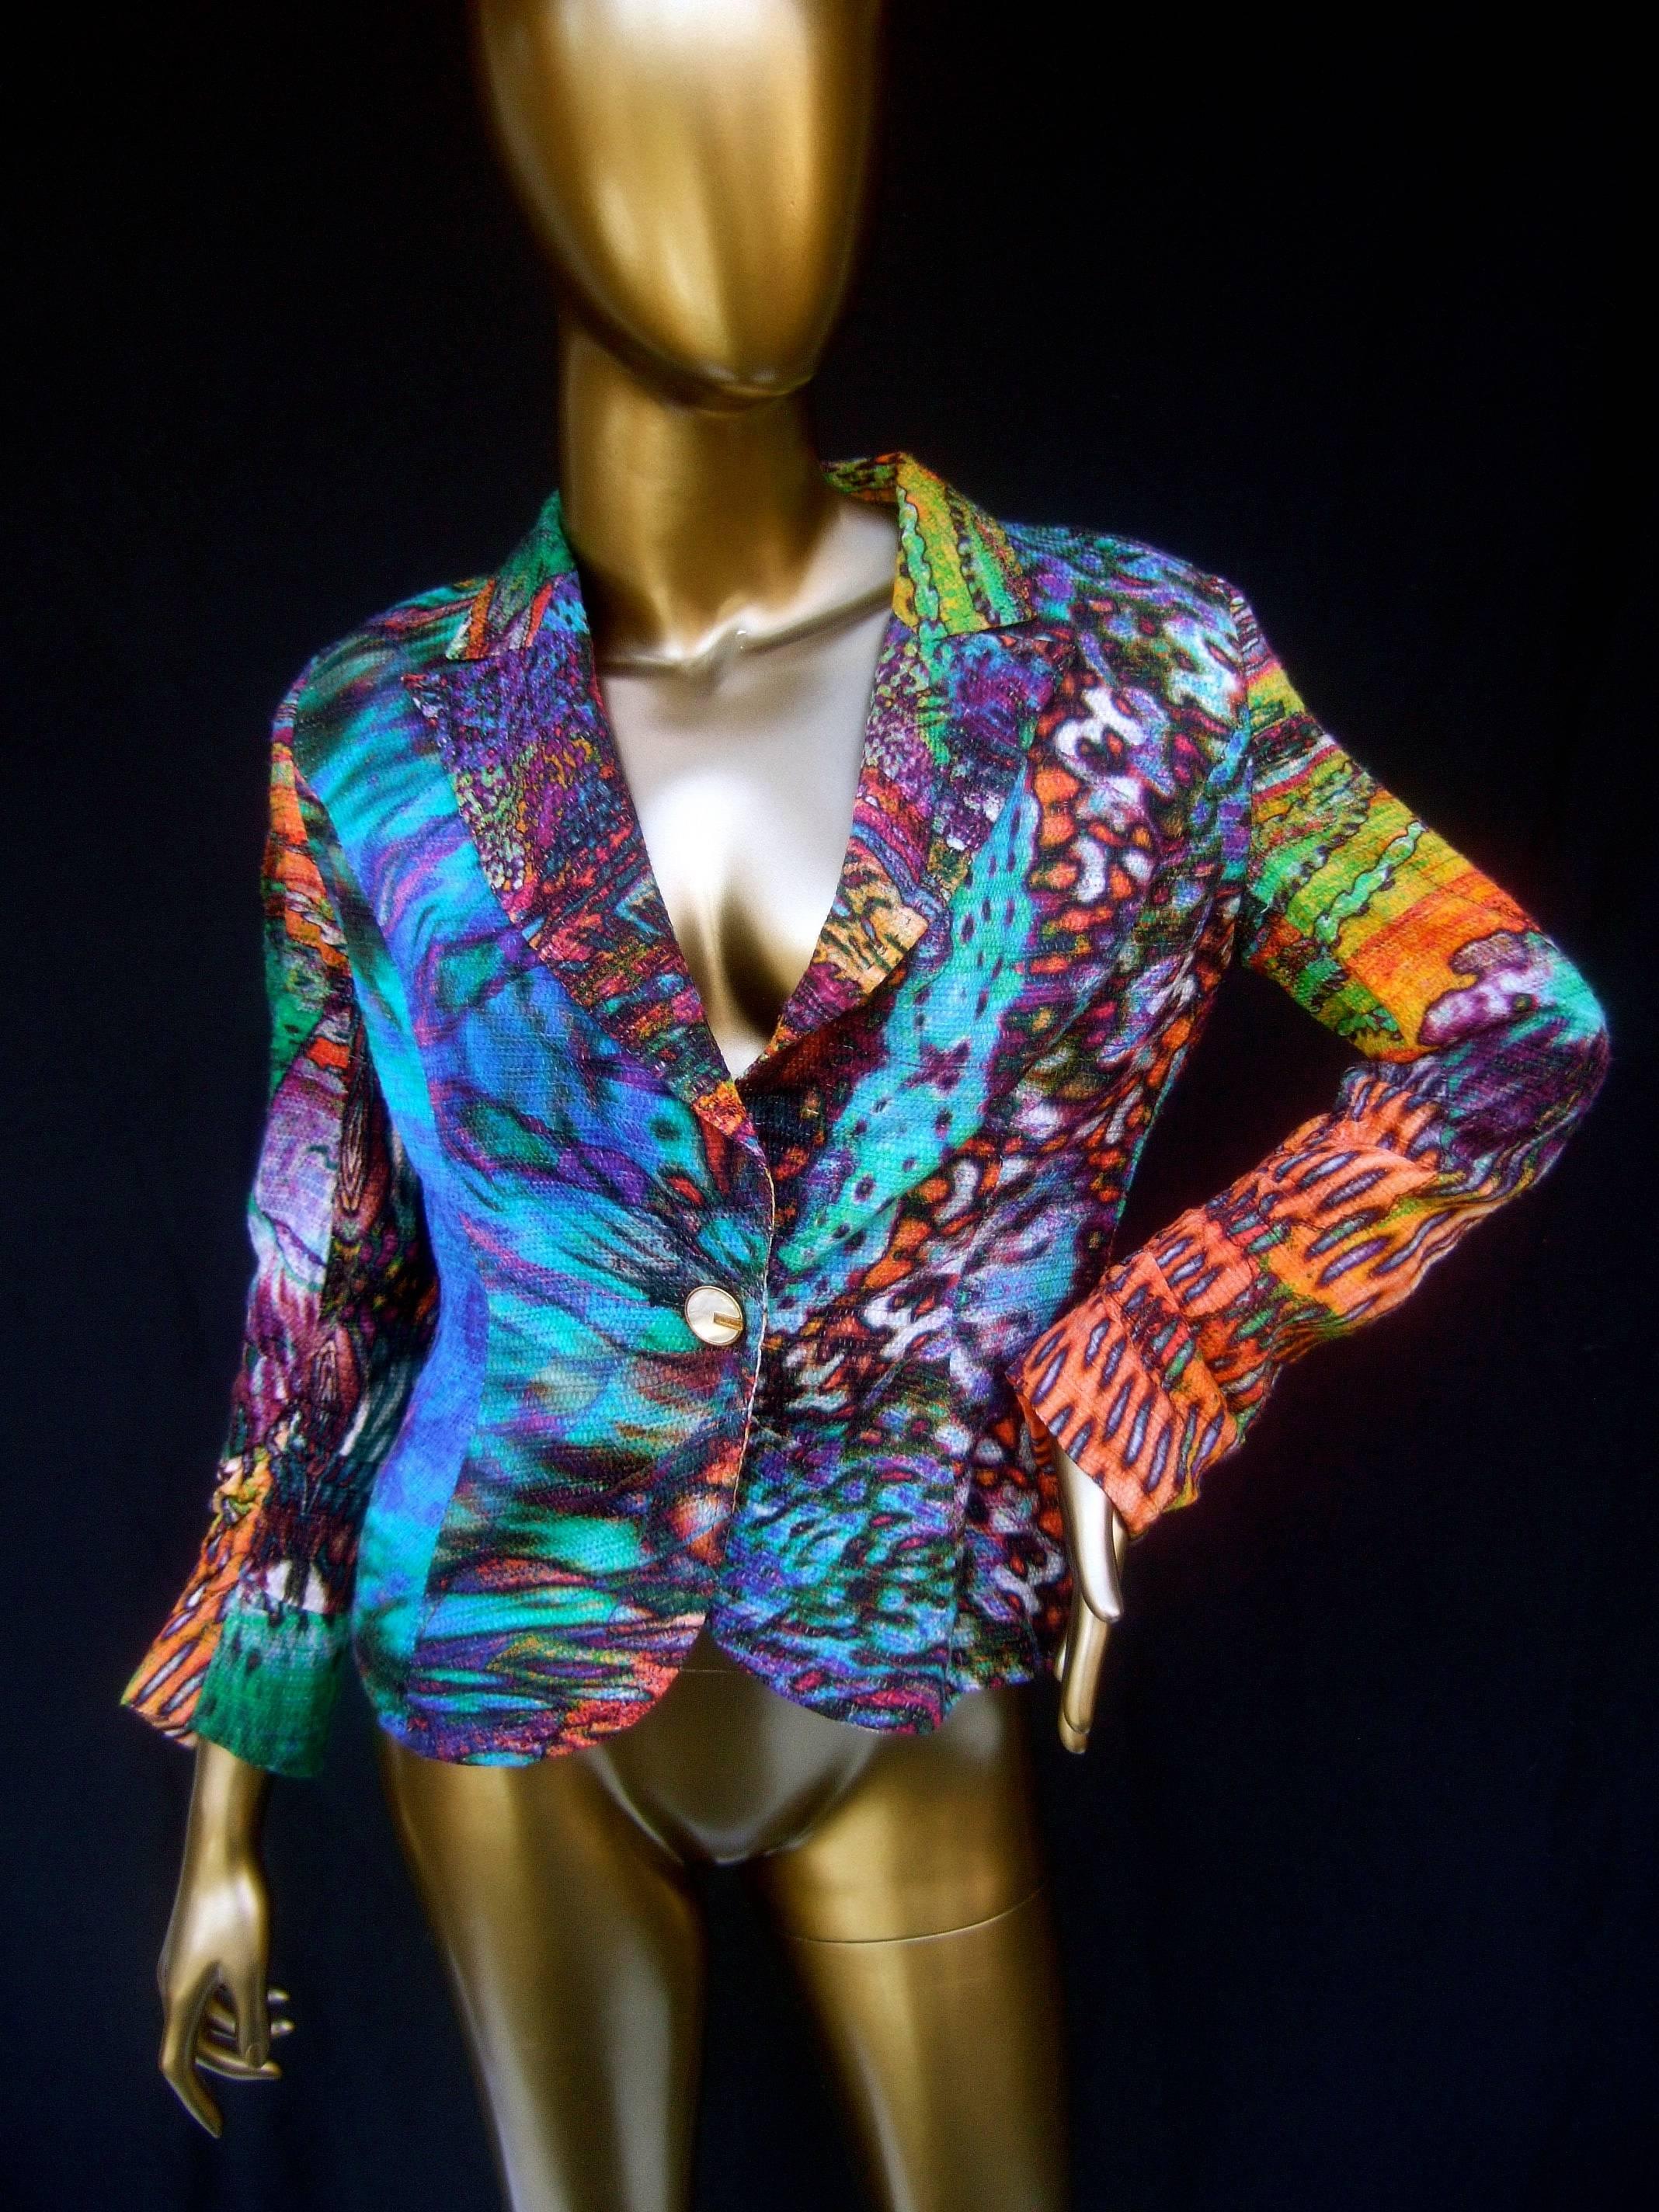 Escada pastel psychedelic graphic print jacket Size 38 
The edgy unique jacket is illustrated with a bold
 vibrant tie-dyed splatter print design throughout 

The jacket lapels have a pointed structure
The sleeve cuffs have subtle pleated